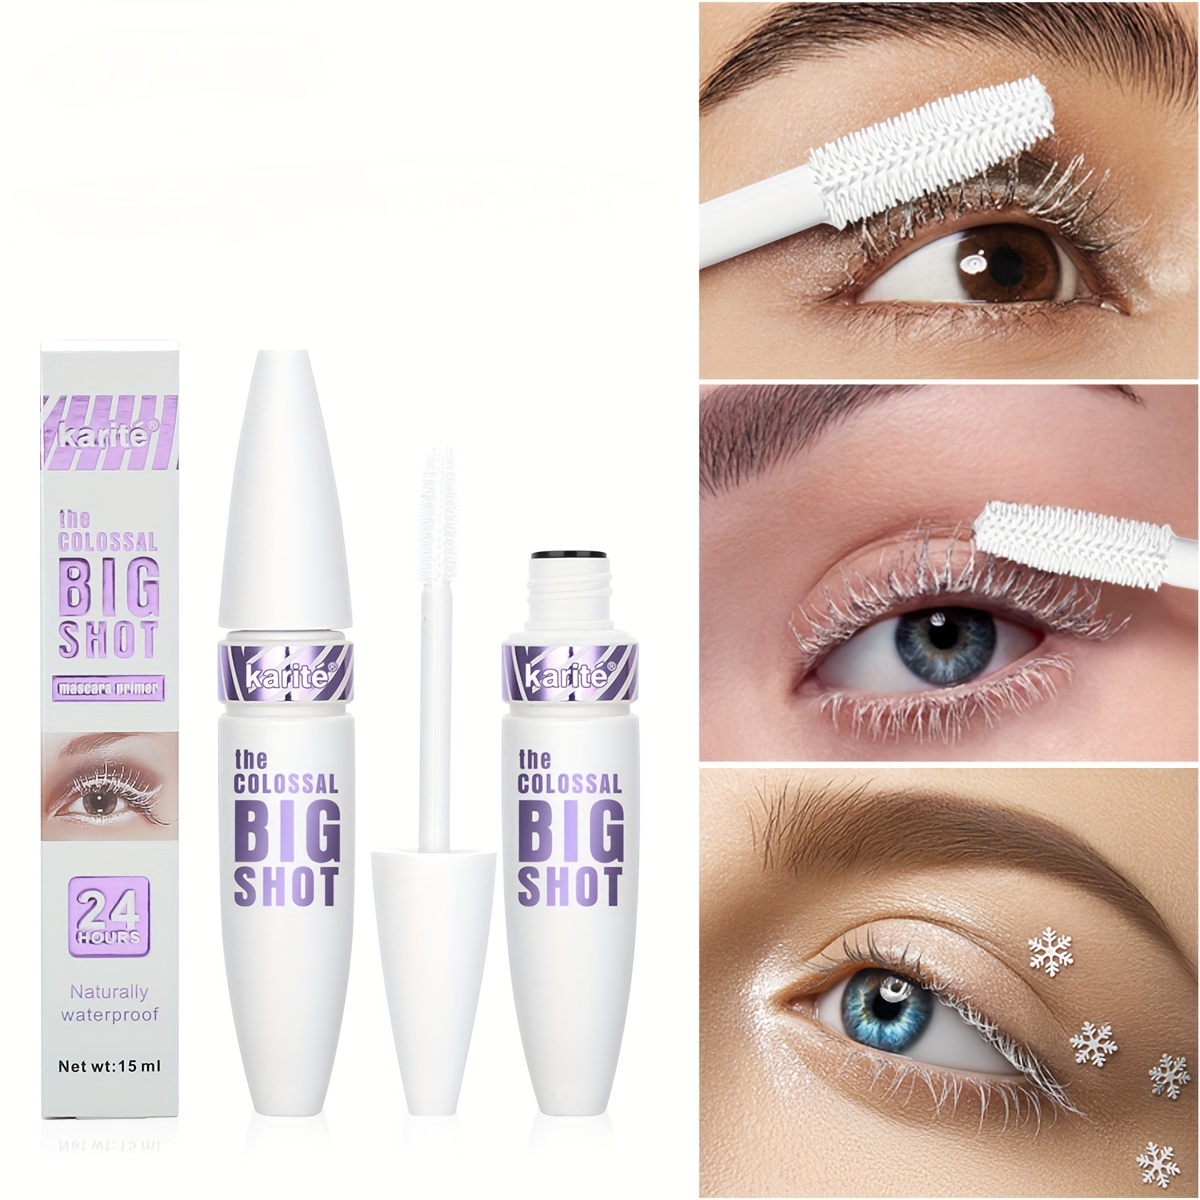 

Lengthening And Curling White Mascara, Waterproof And Sweatproof Colored Lashes, Non-clumping And Non-smudging Mascara For Cosplay Party Eye Makeup